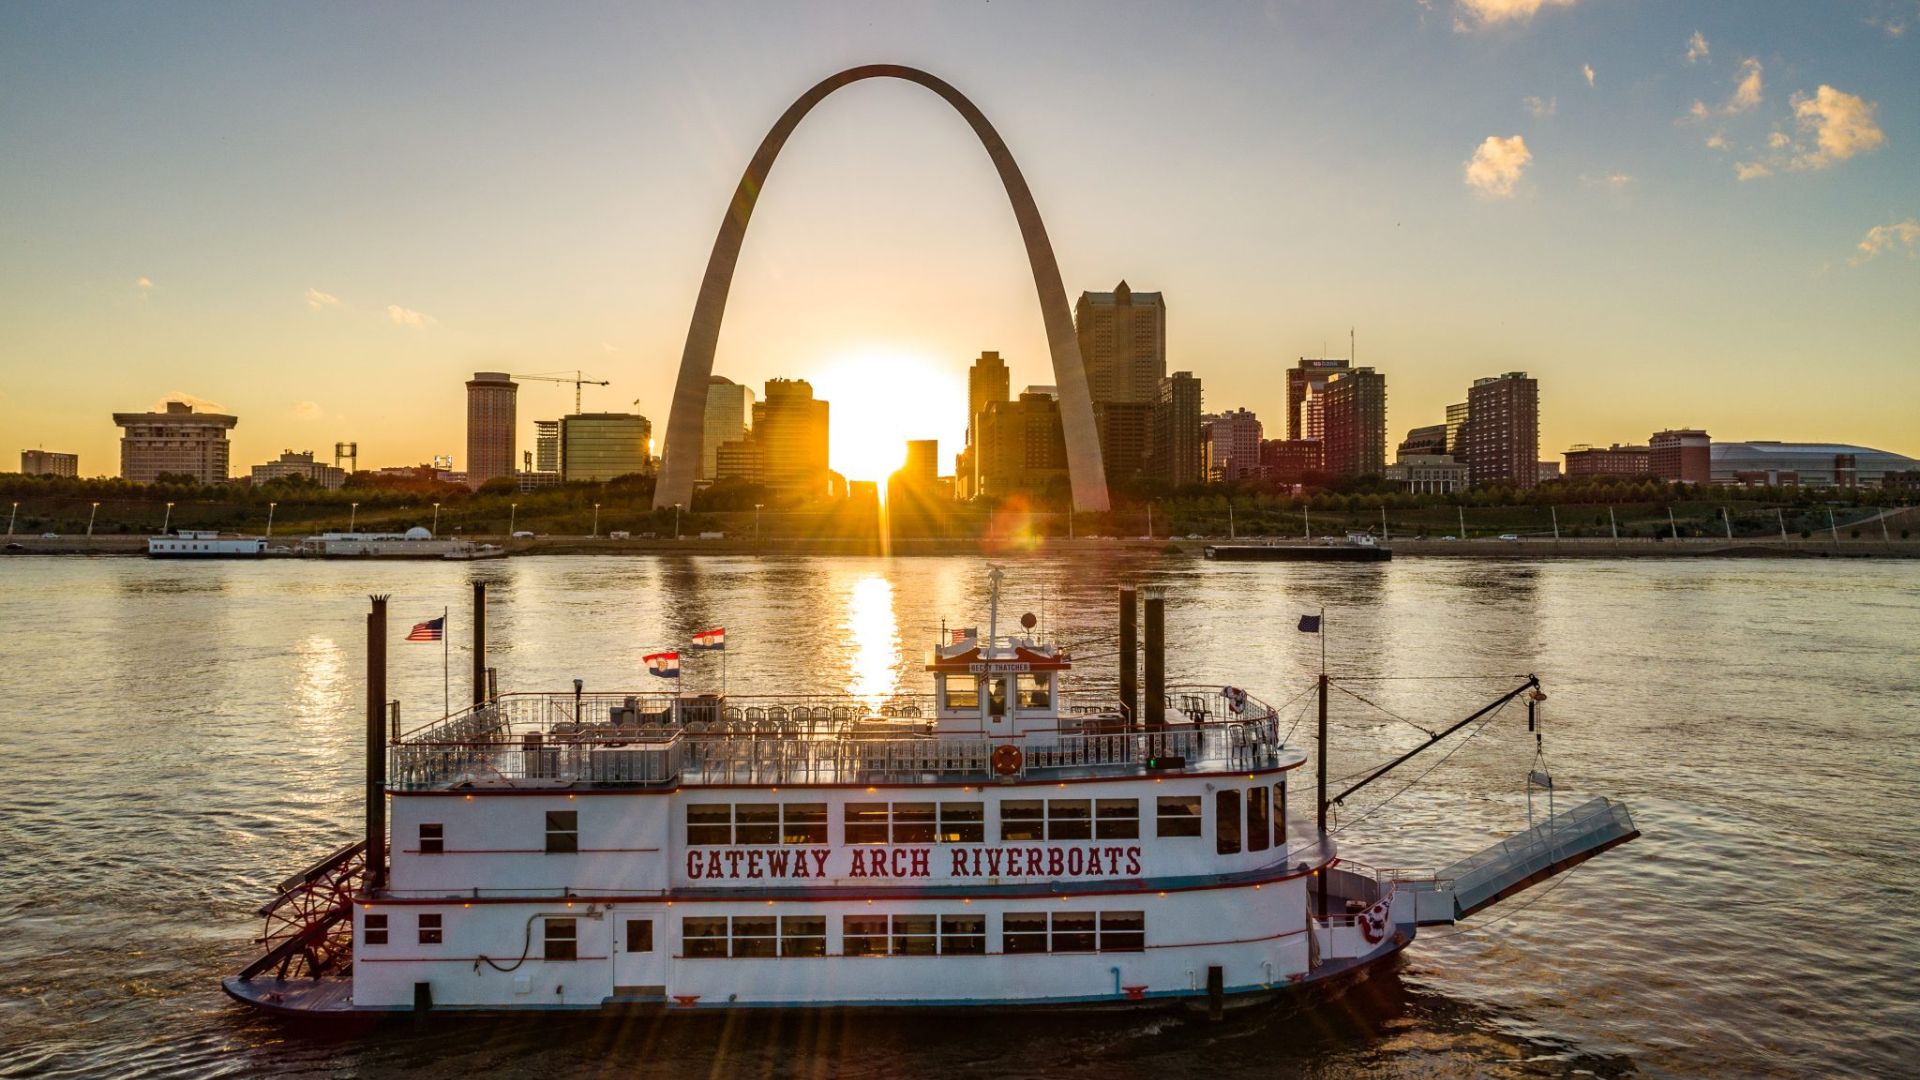 The Riverboats at the Gateway Arch cruise along the Mighty Mississippi.